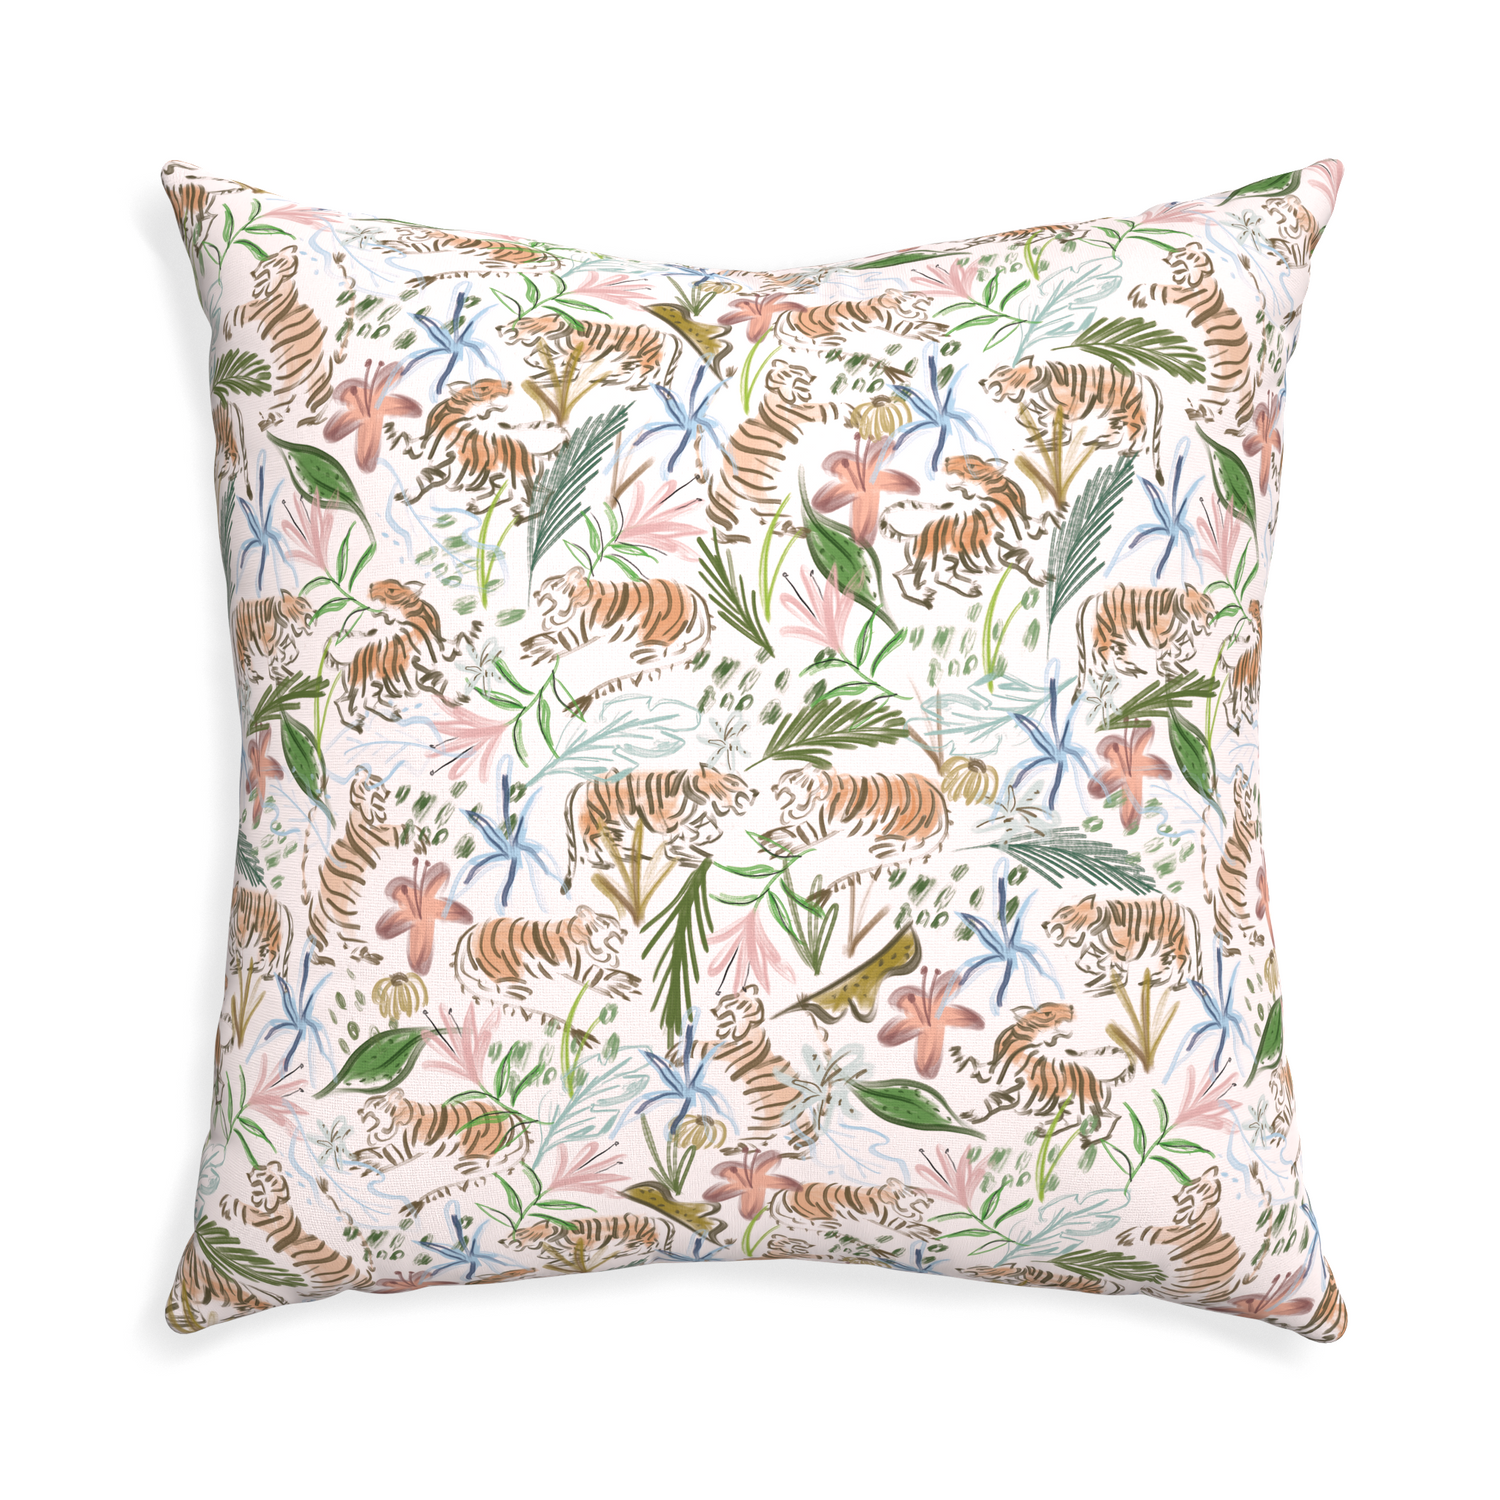 Euro-sham frida pink custom pink chinoiserie tigerpillow with none on white background